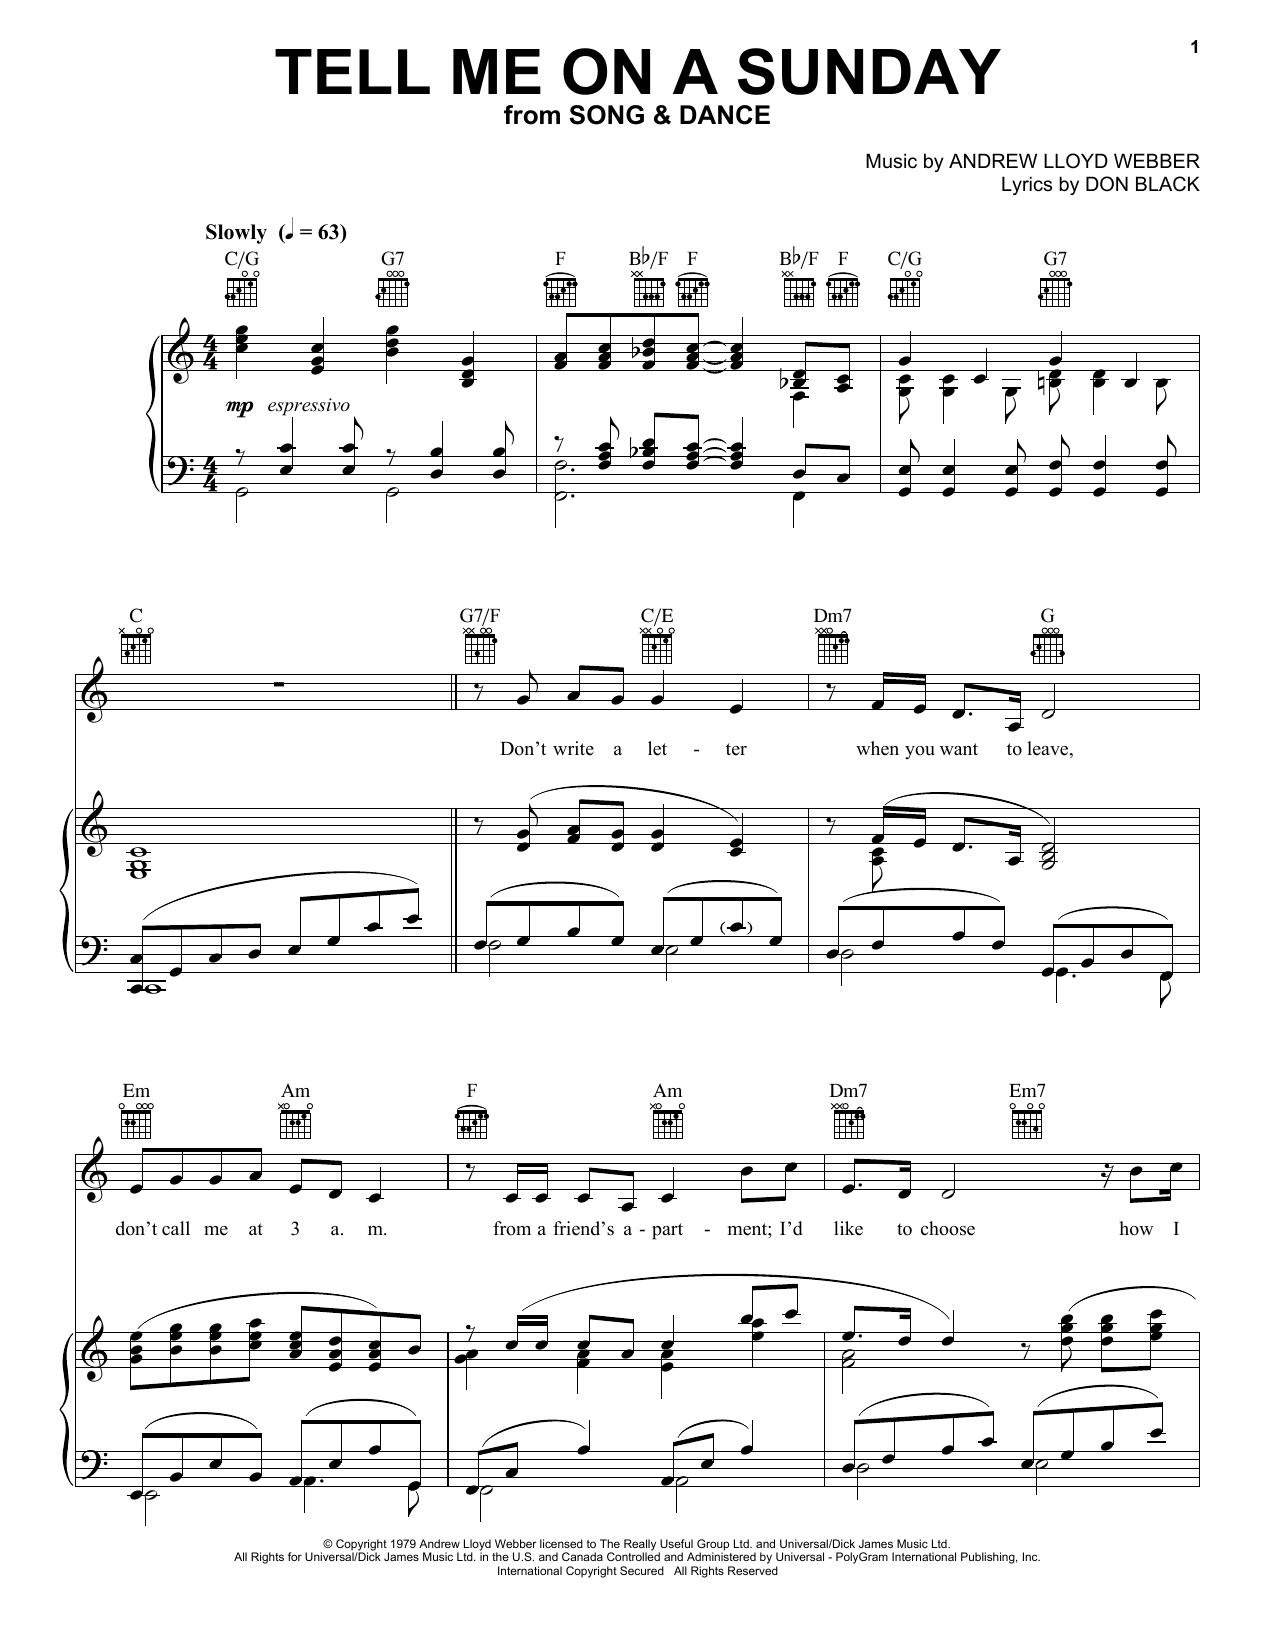 Andrew Lloyd Webber Tell Me On A Sunday sheet music notes and chords. Download Printable PDF.